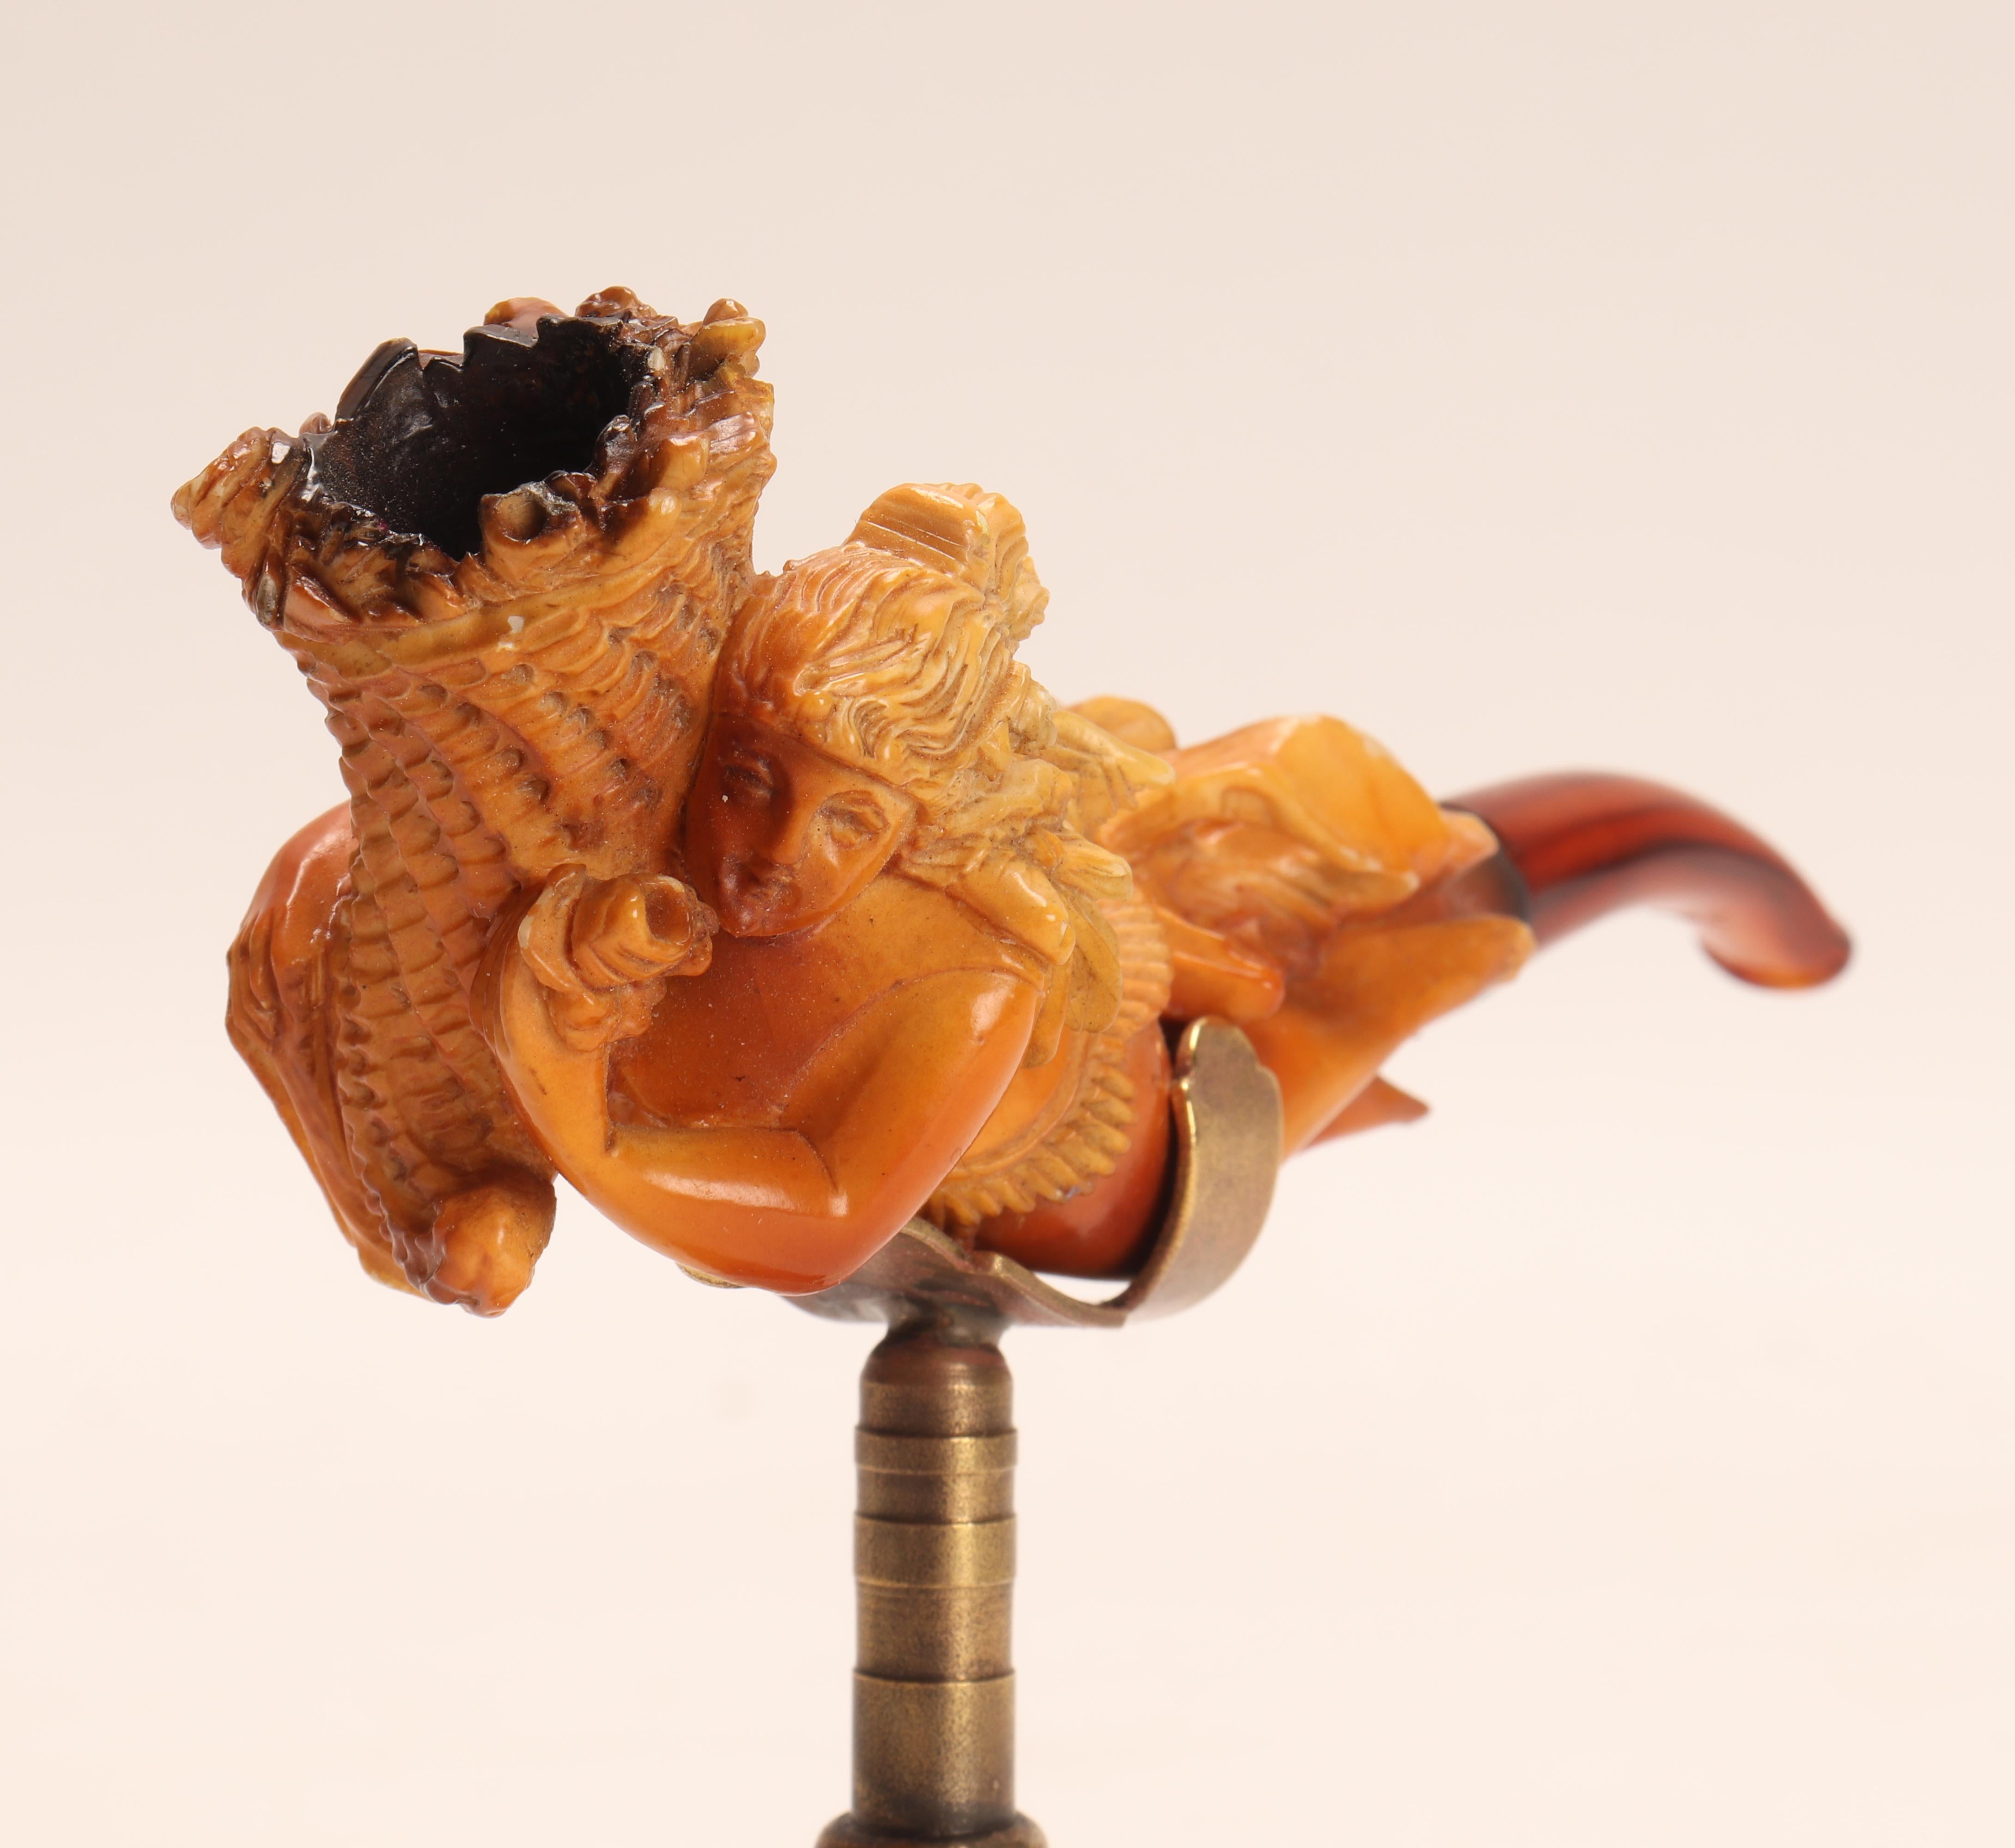 Austrian Meershaum Pipe with a Goddess Holding a Cornucopia, Vienna 1890 For Sale